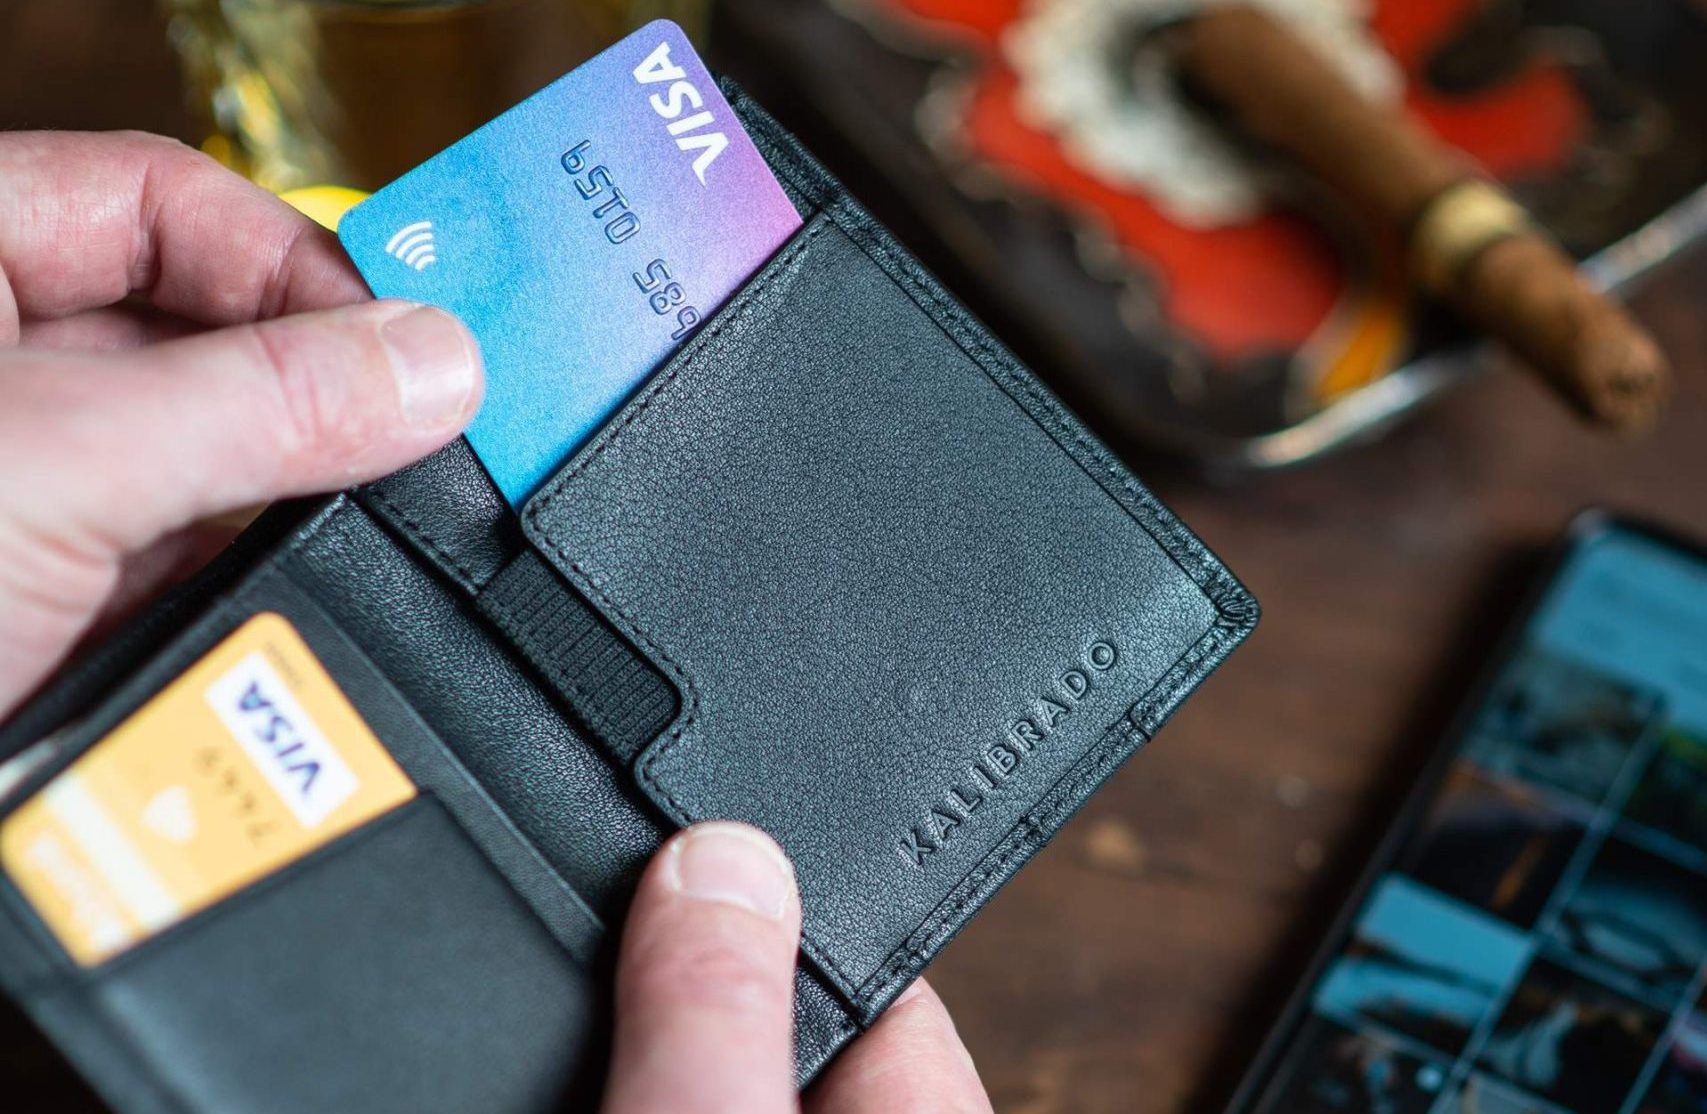 Trending Rise in Confidence Sees Credit Cards Powering the Economy